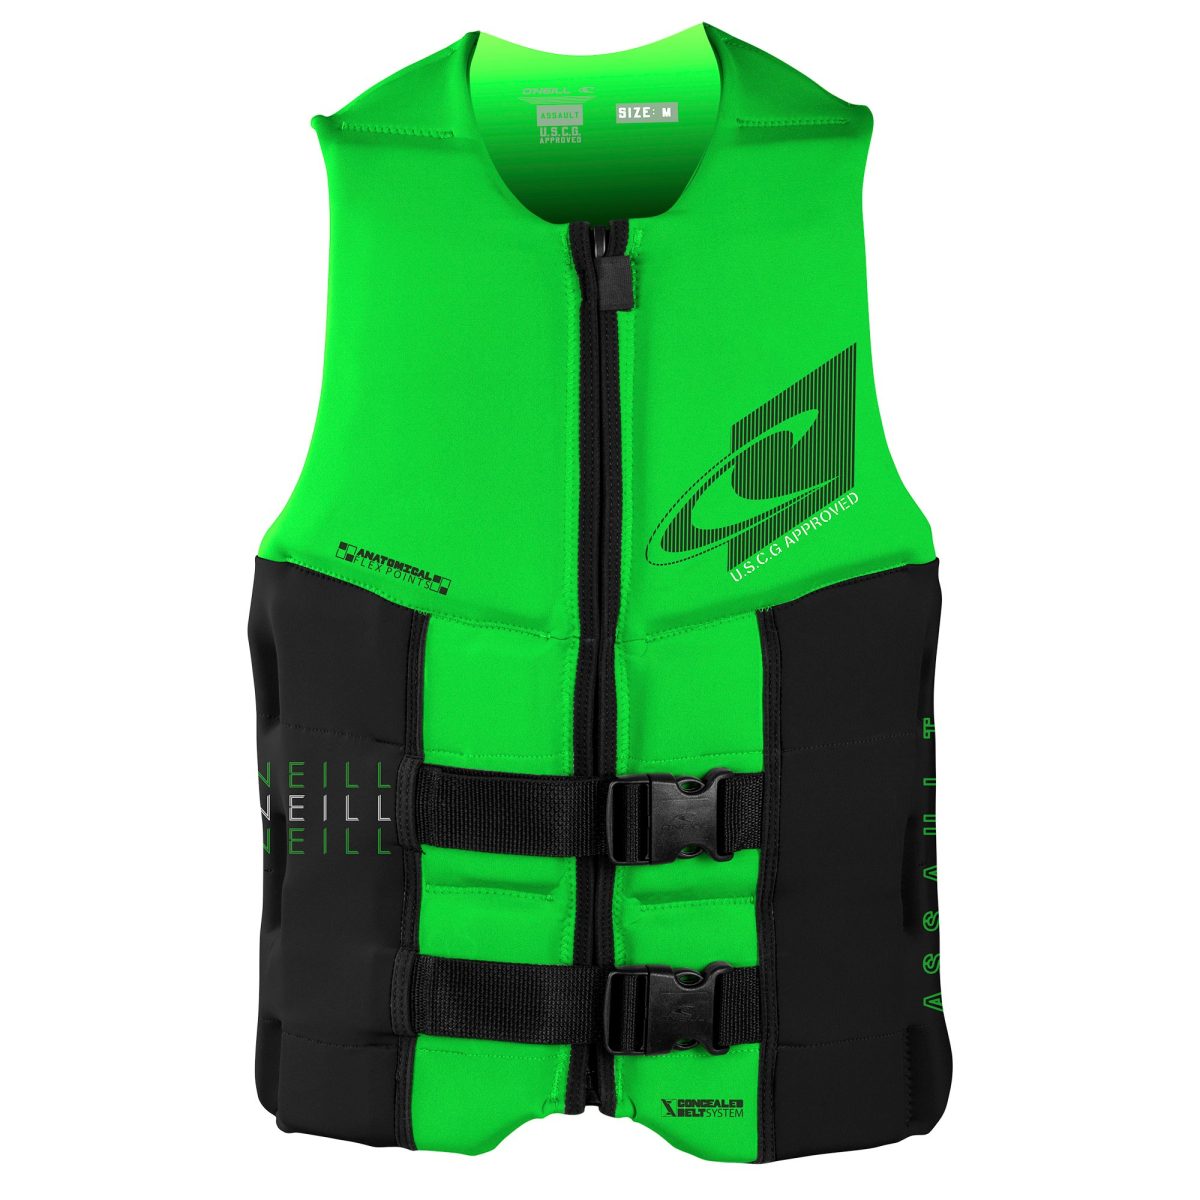 O'Neill Men's Assault Life Jacket - Lime - S in Green